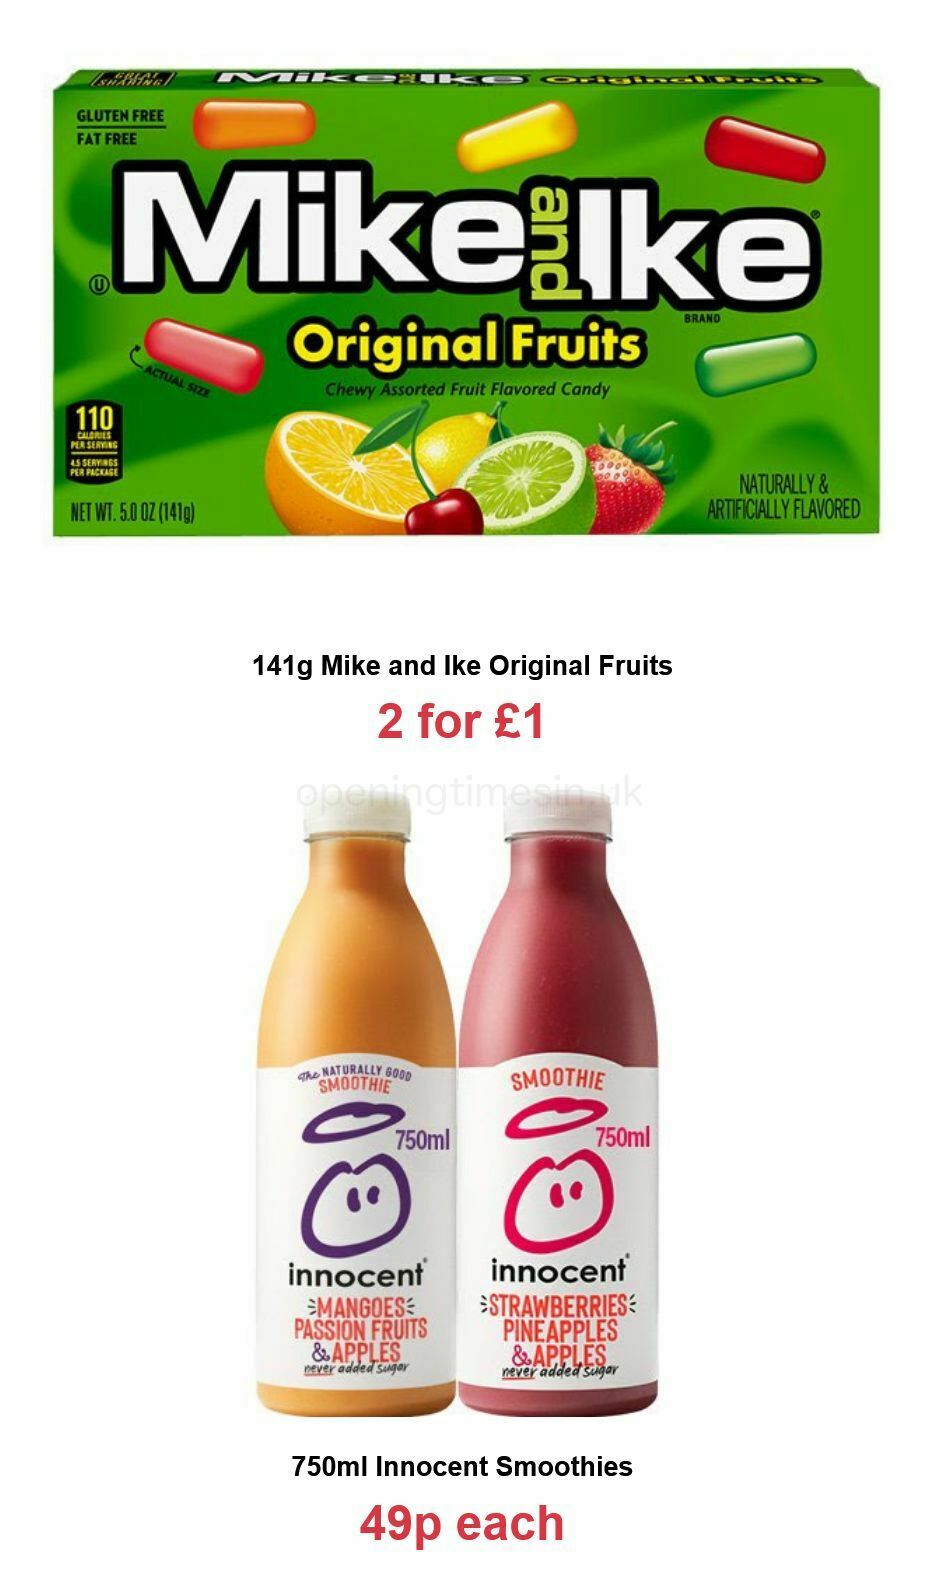 Farmfoods Offers from 29 June